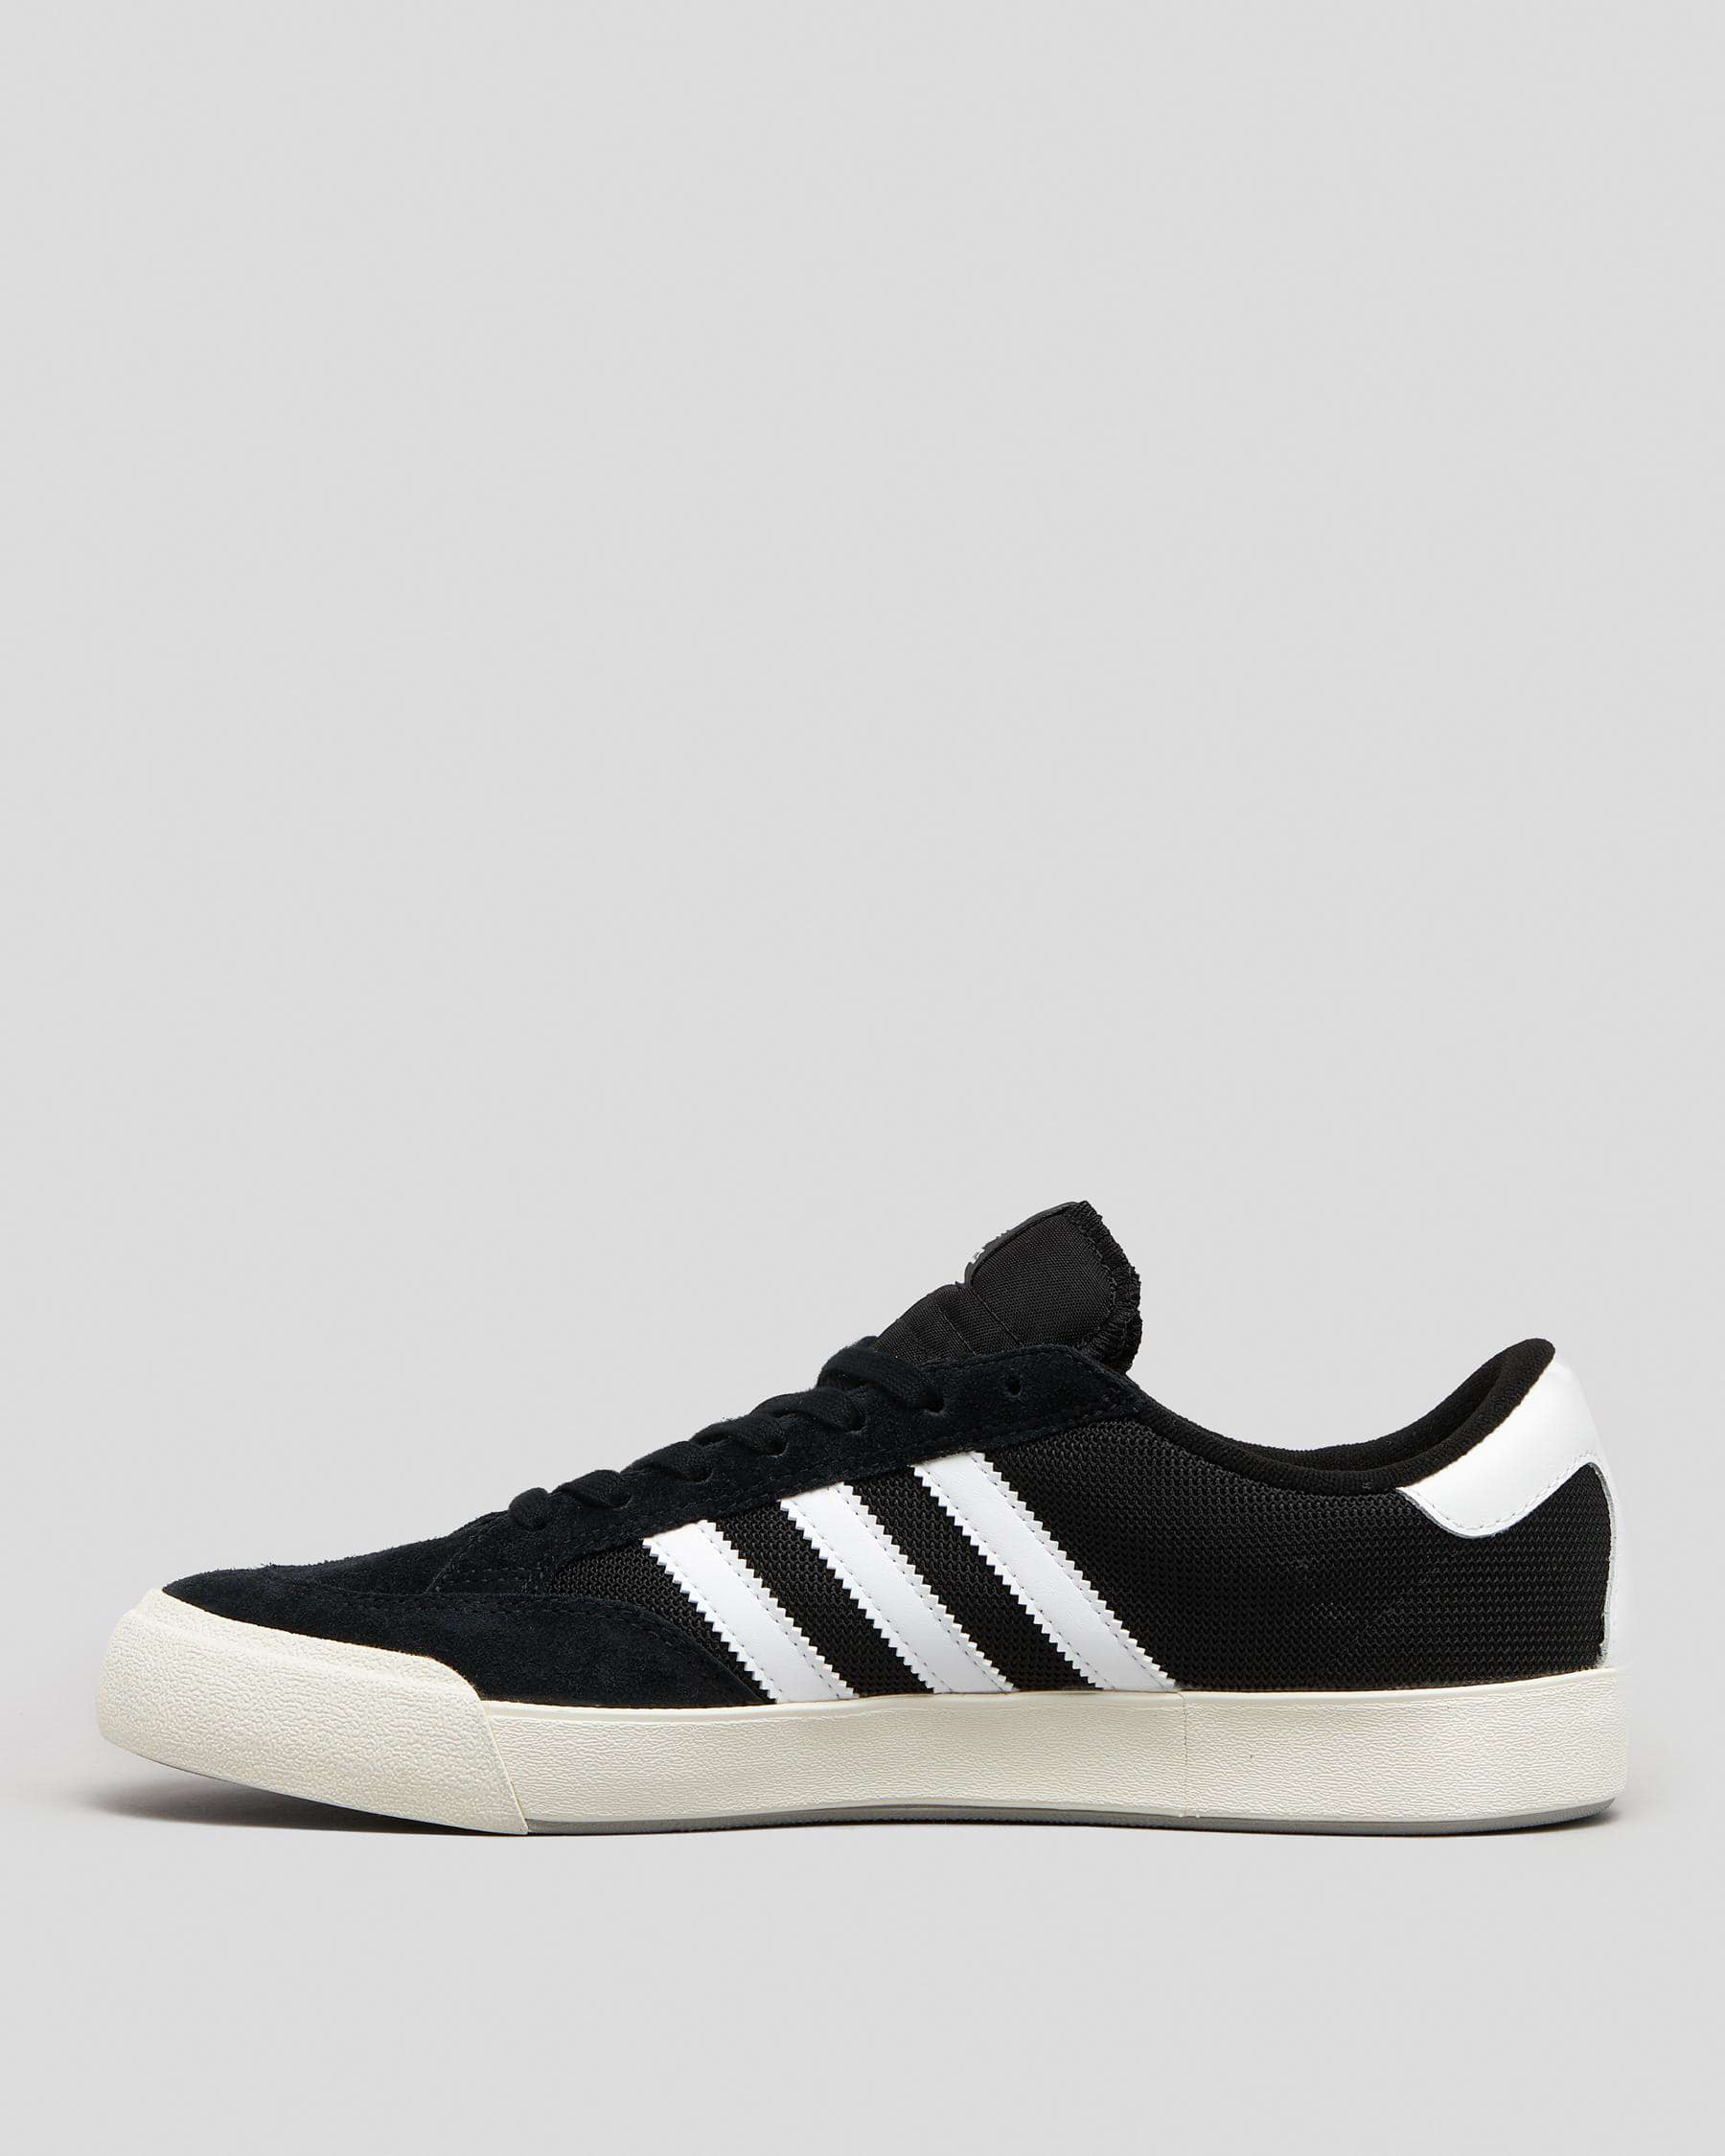 Adidas Nora Shoes In Core Black/ftwr White/grey Two - Fast Shipping ...